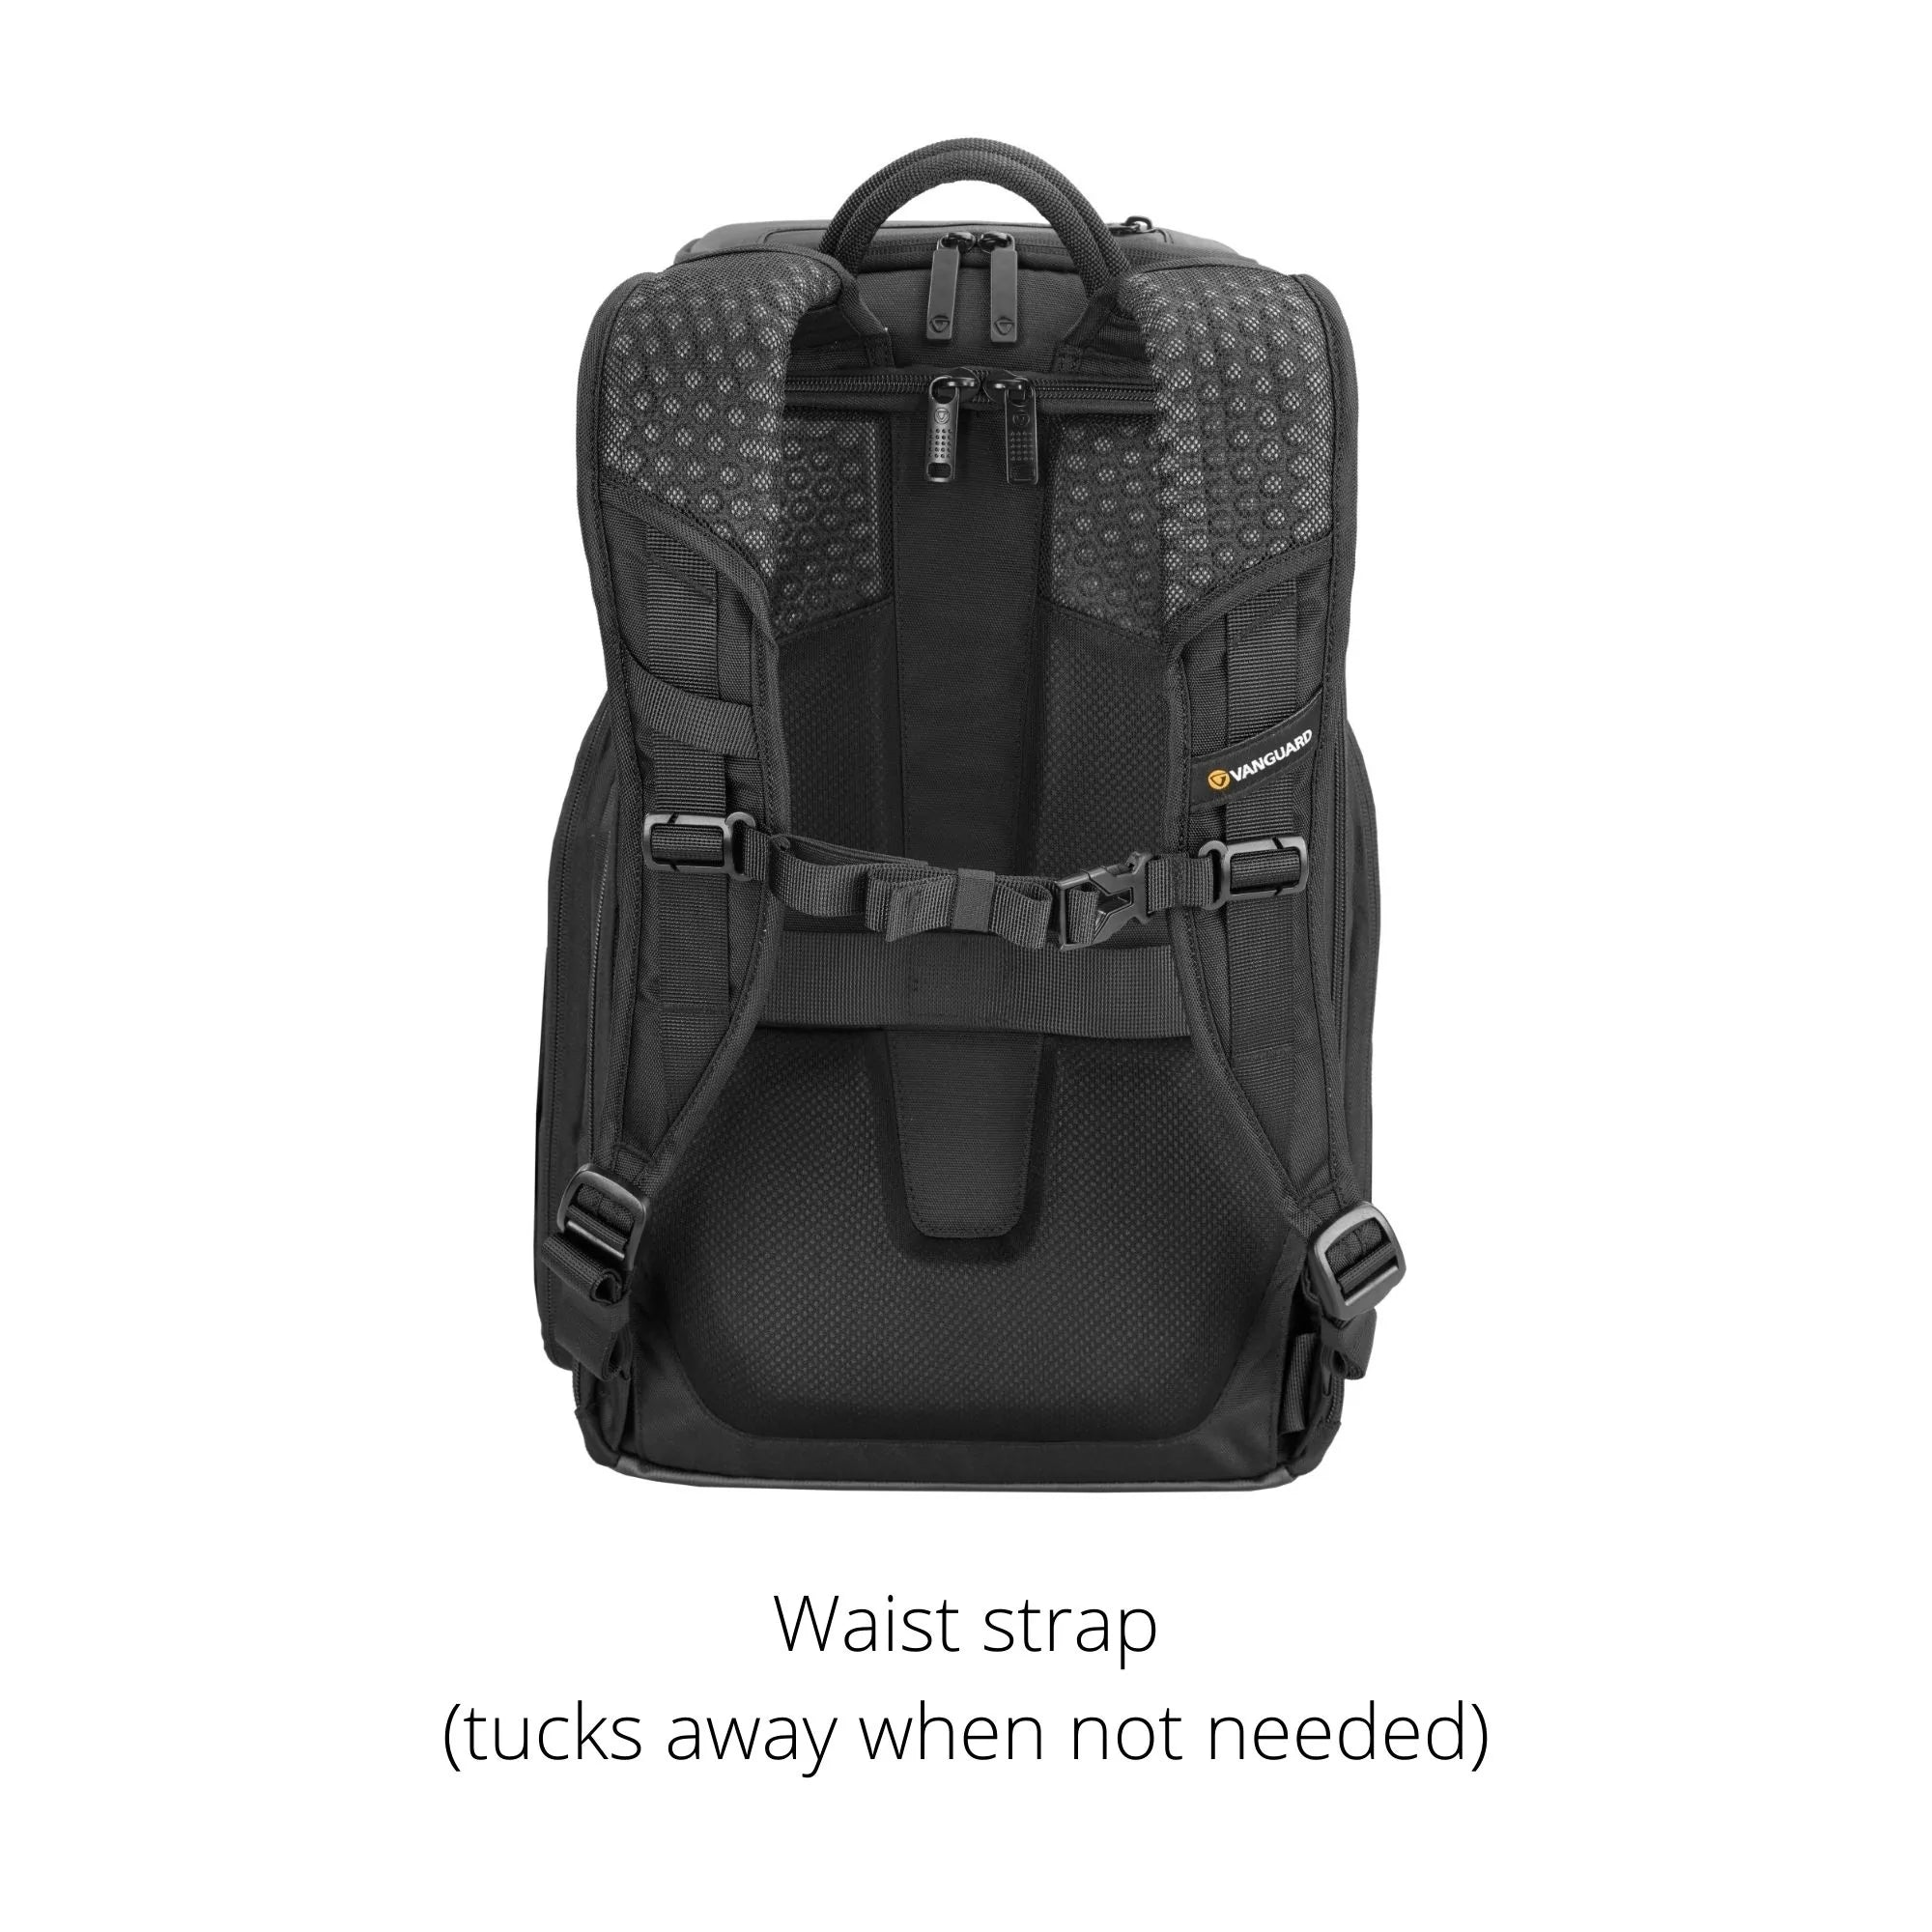 Vanguard VEO adaptor R48 GY backpack with USB port - rear access